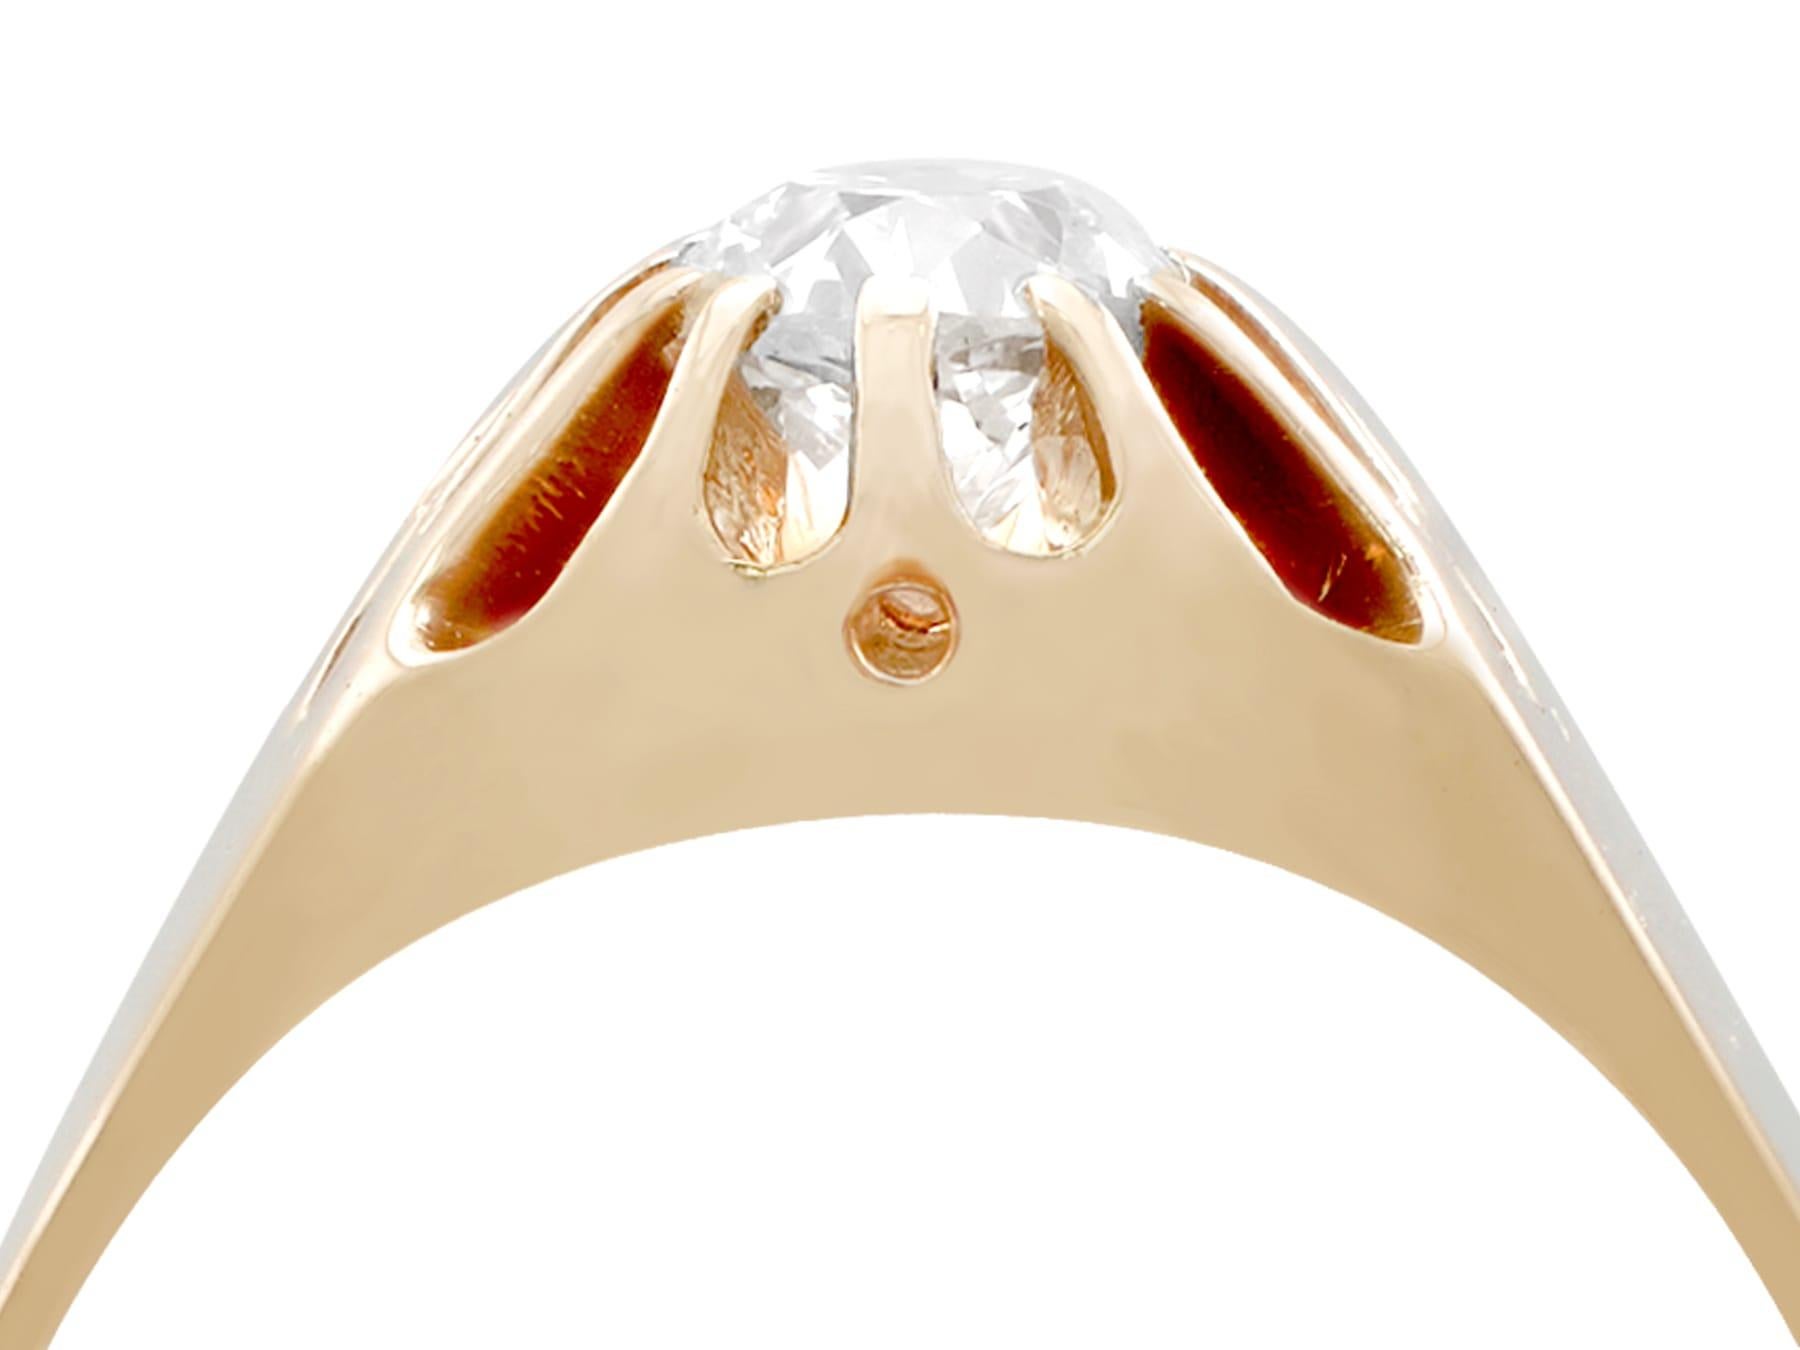 A stunning antique unisex 0.58 carat diamond and 14 karat rose gold solitaire style engagement ring; part of our diverse antique estate jewelry collections.

This fine and impressive unisex antique diamond solitaire ring has been crafted in 14k rose